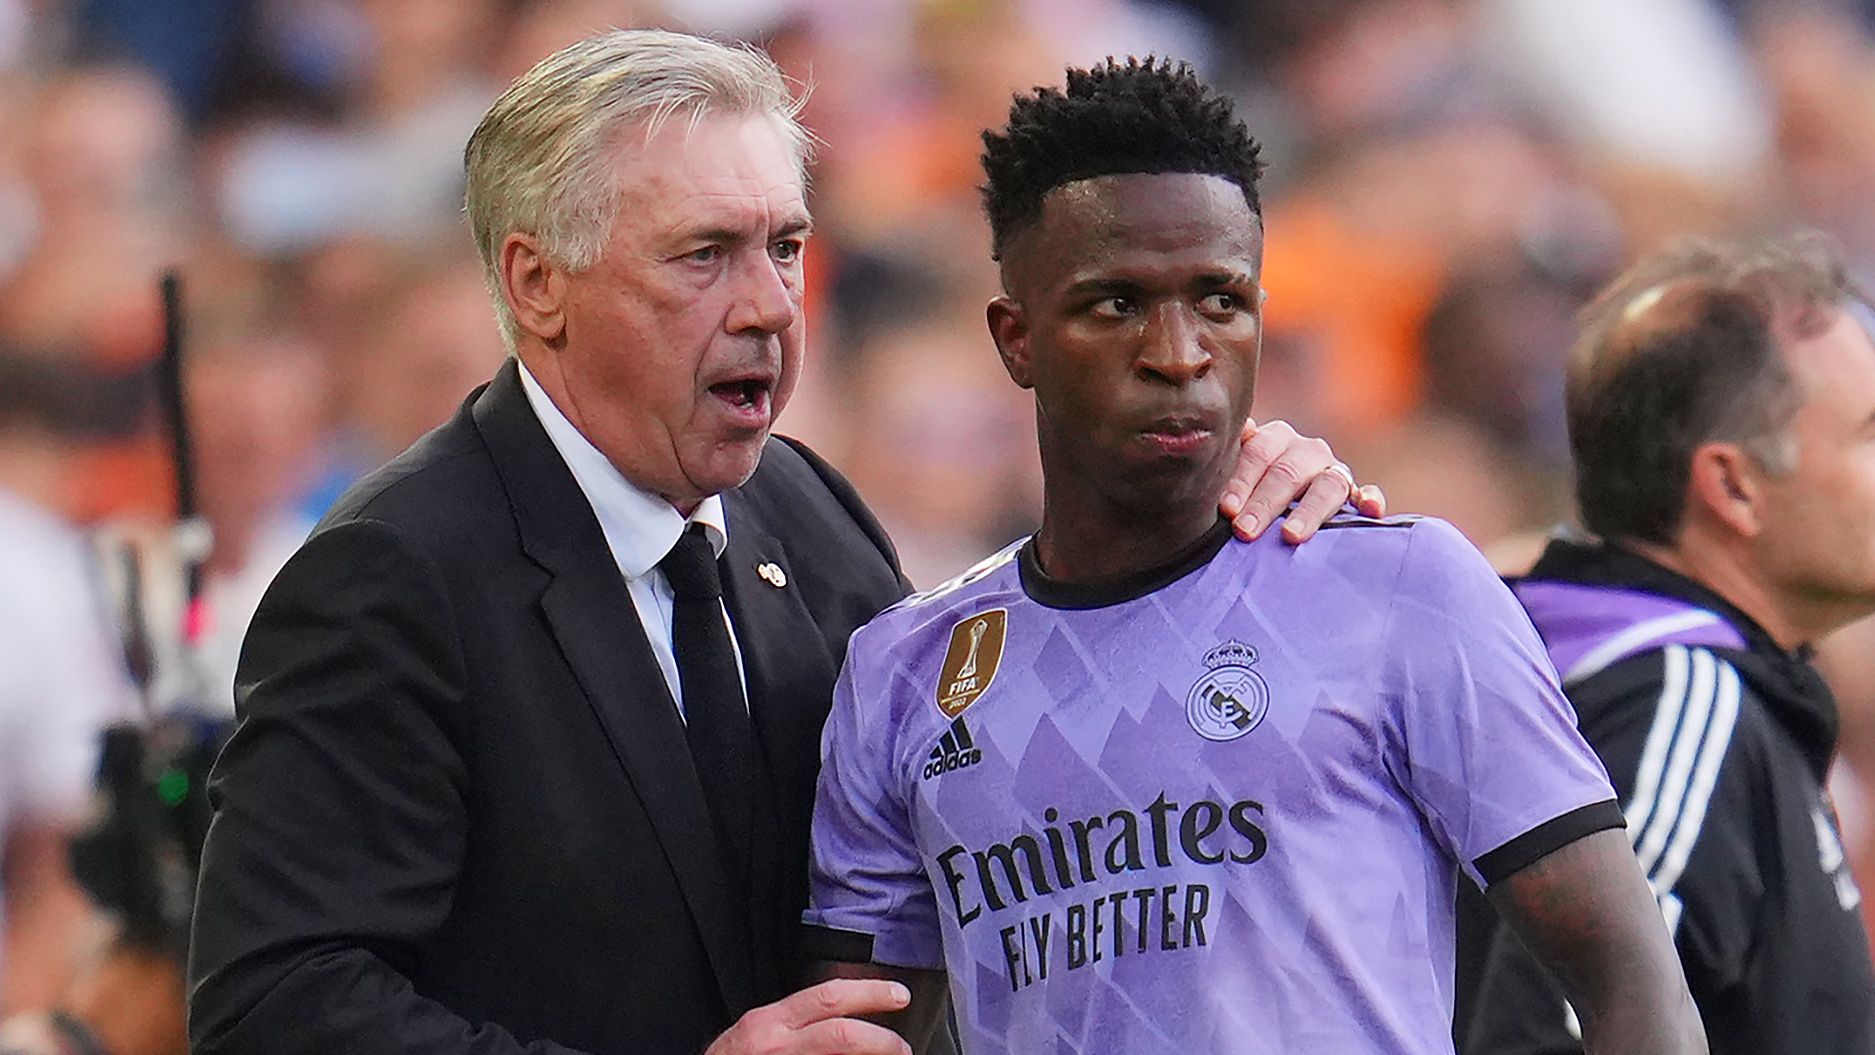 VALENCIA, SPAIN - MAY 21: Carlo Ancelotti, Head Coach of Real Madrid, interacts with Vinicius Junior of Real Madrid during the LaLiga Santander match between Valencia CF and Real Madrid CF at Estadio Mestalla on May 21, 2023 in Valencia, Spain. (Photo by Aitor Alcalde/Getty Images)